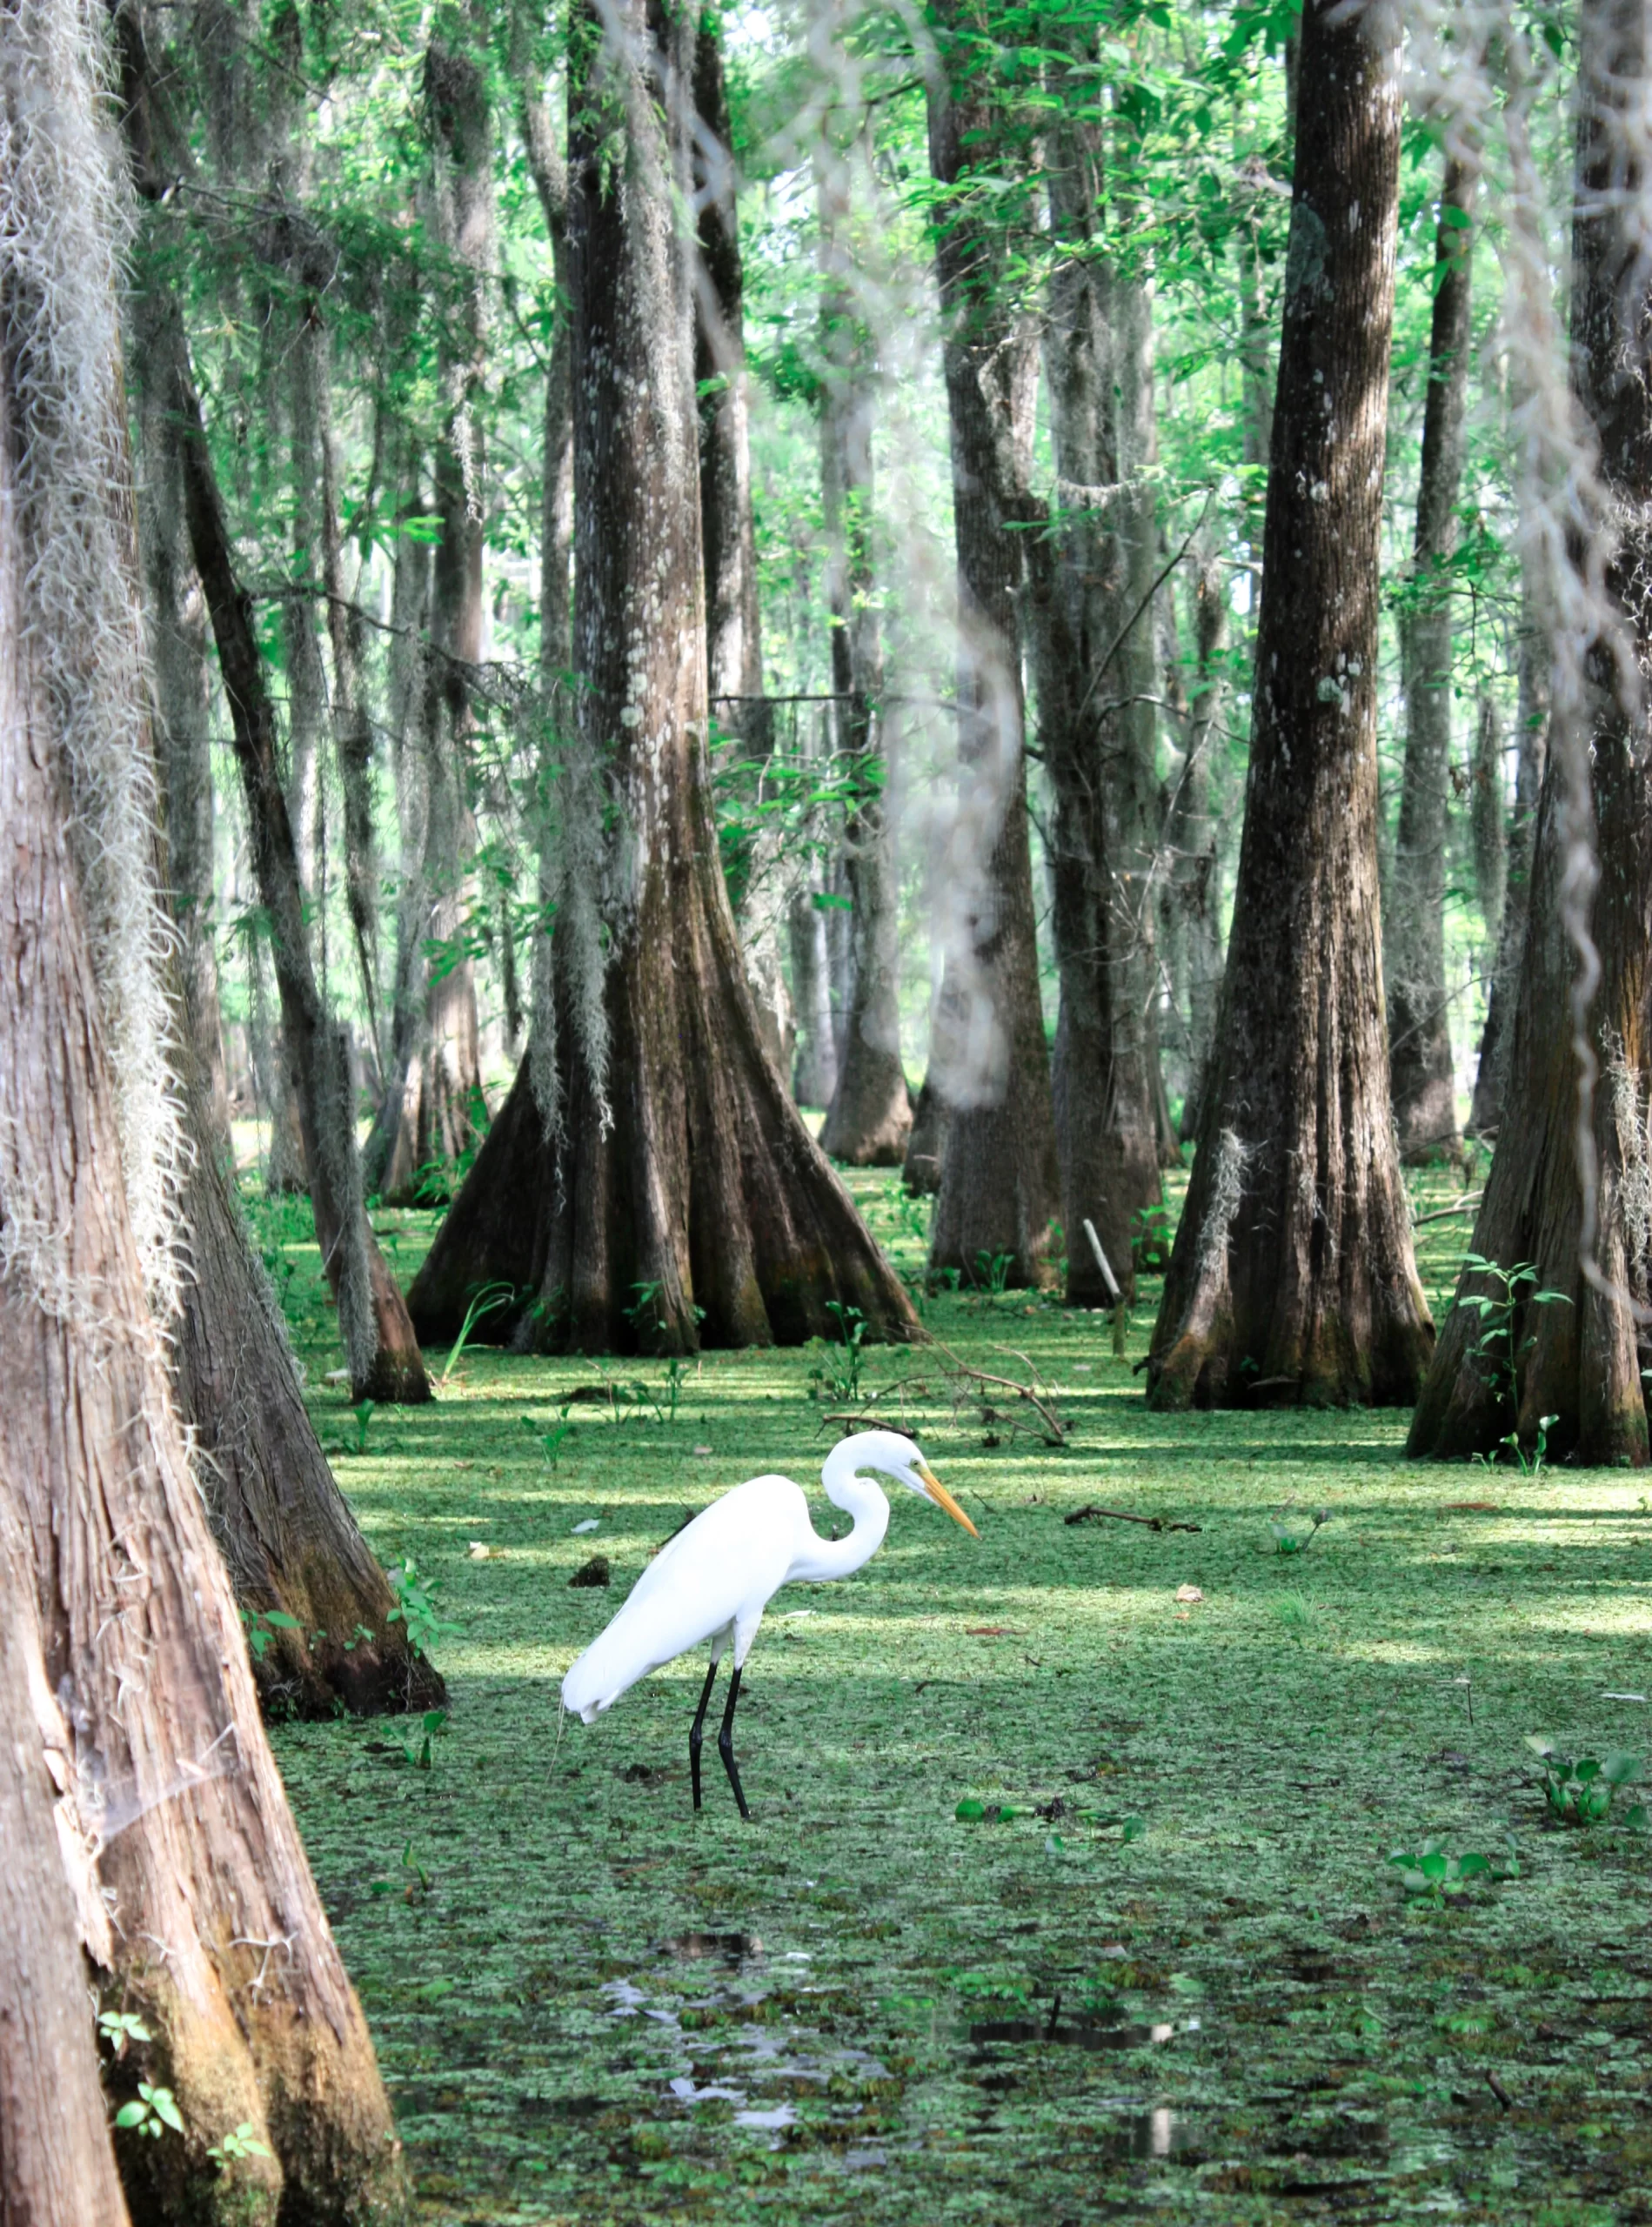  Downloads 6,665 Lac Martin, Parish Governing Authority District 6, Louisiana, USA Published on June 23, 2020 Canon, EOS 450D Free to use under the Unsplash License An egret bird in the swamp, at the Lake Martin